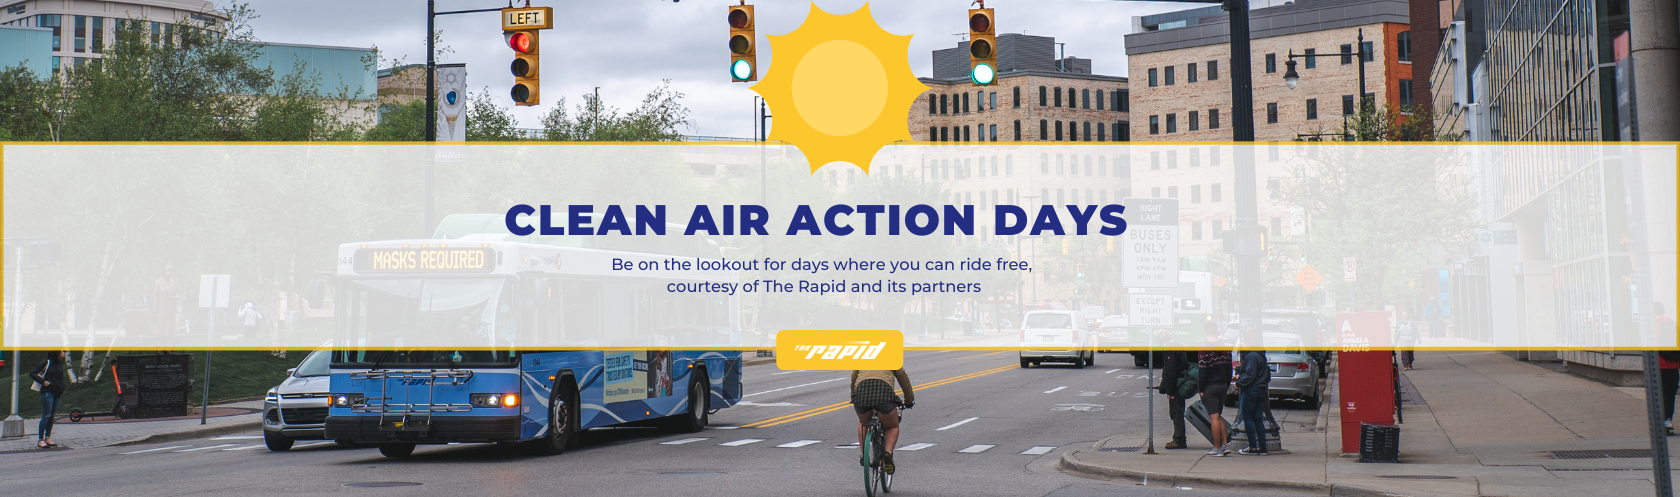 Clean Air Action Day Hero